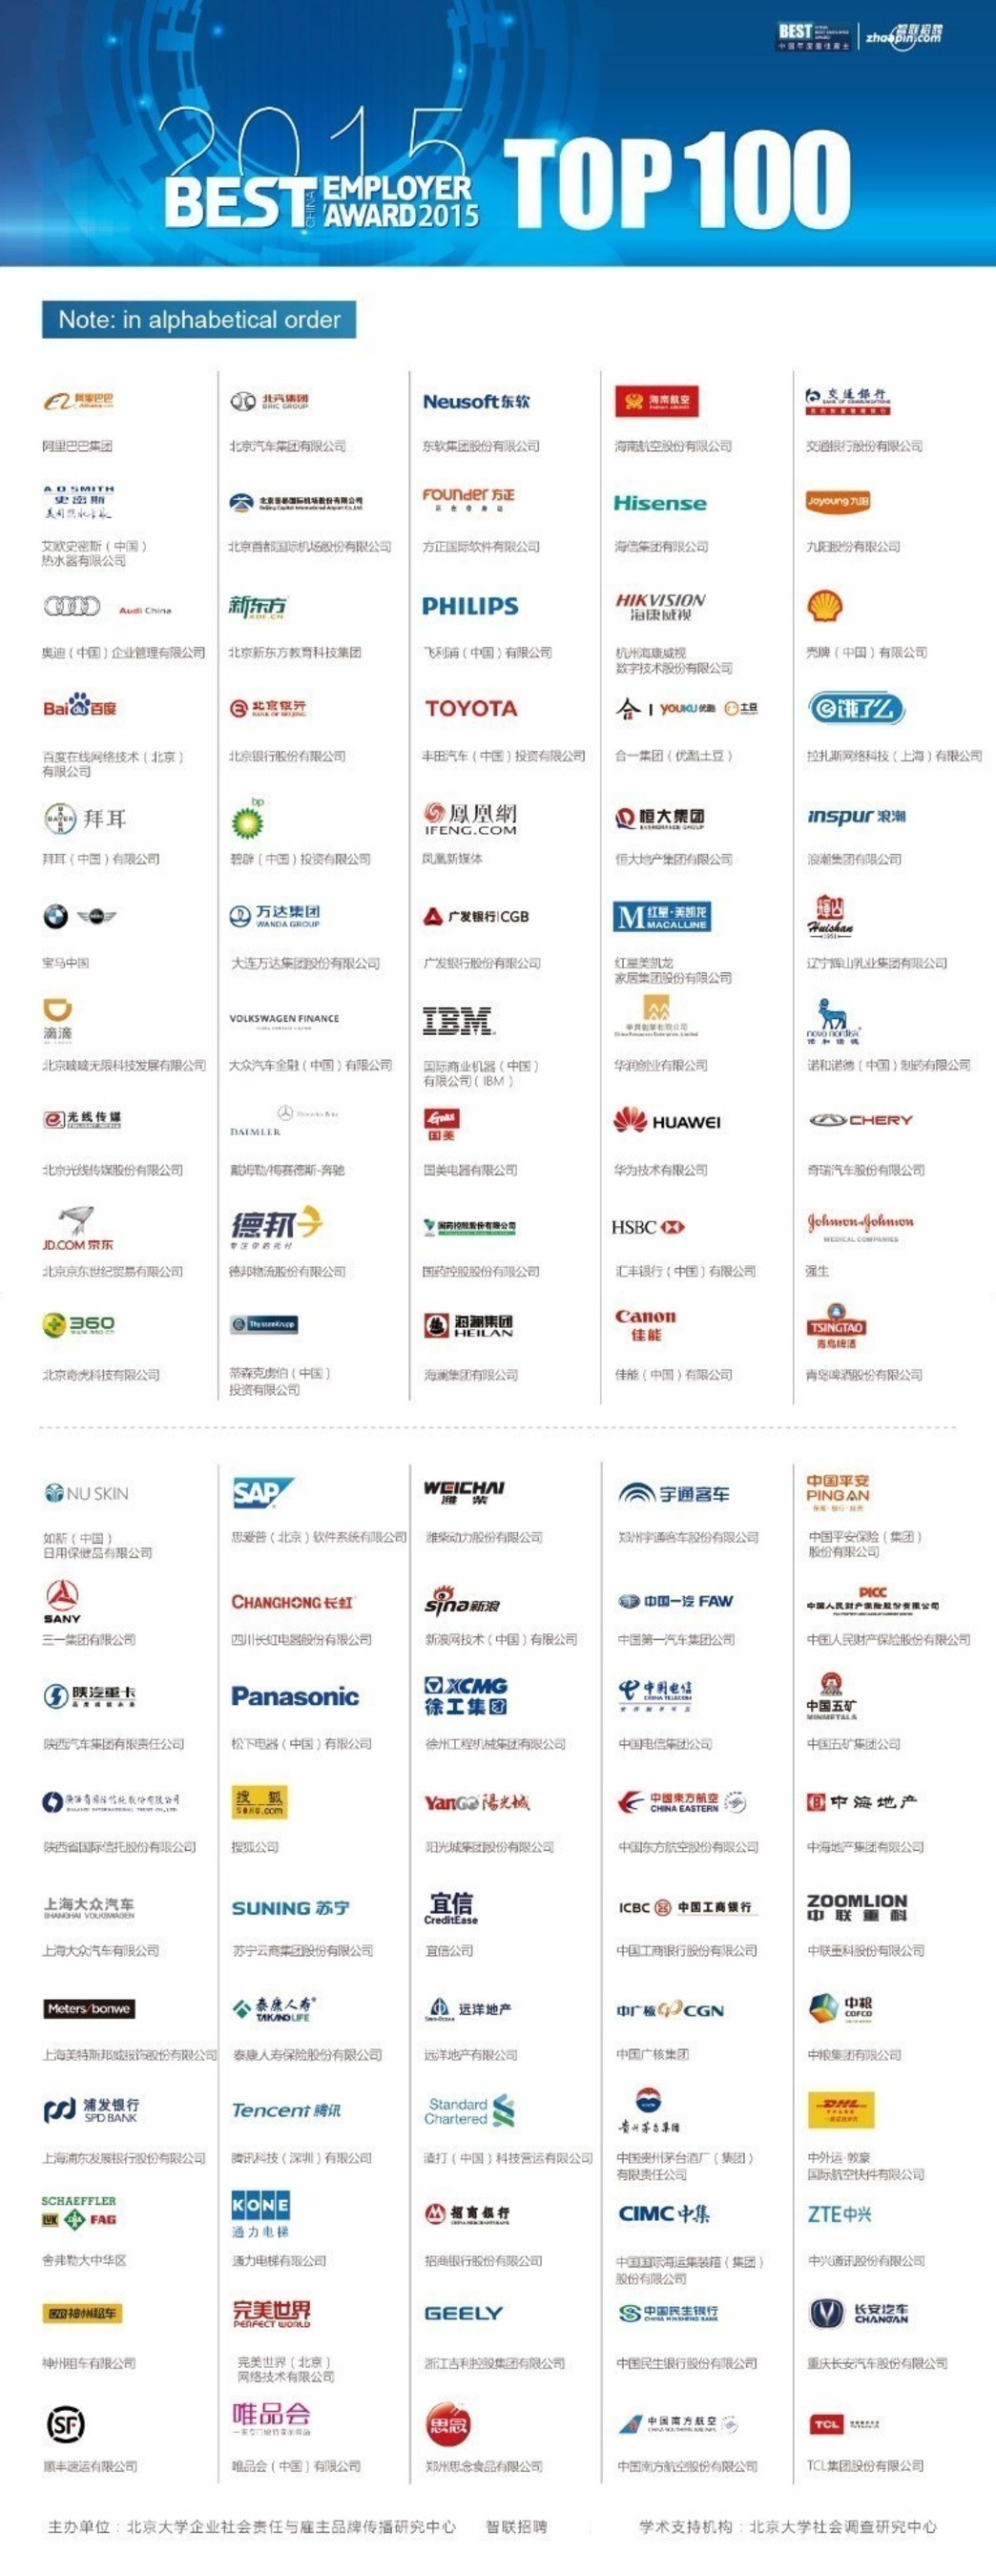 2015 Top 100 Employers in China